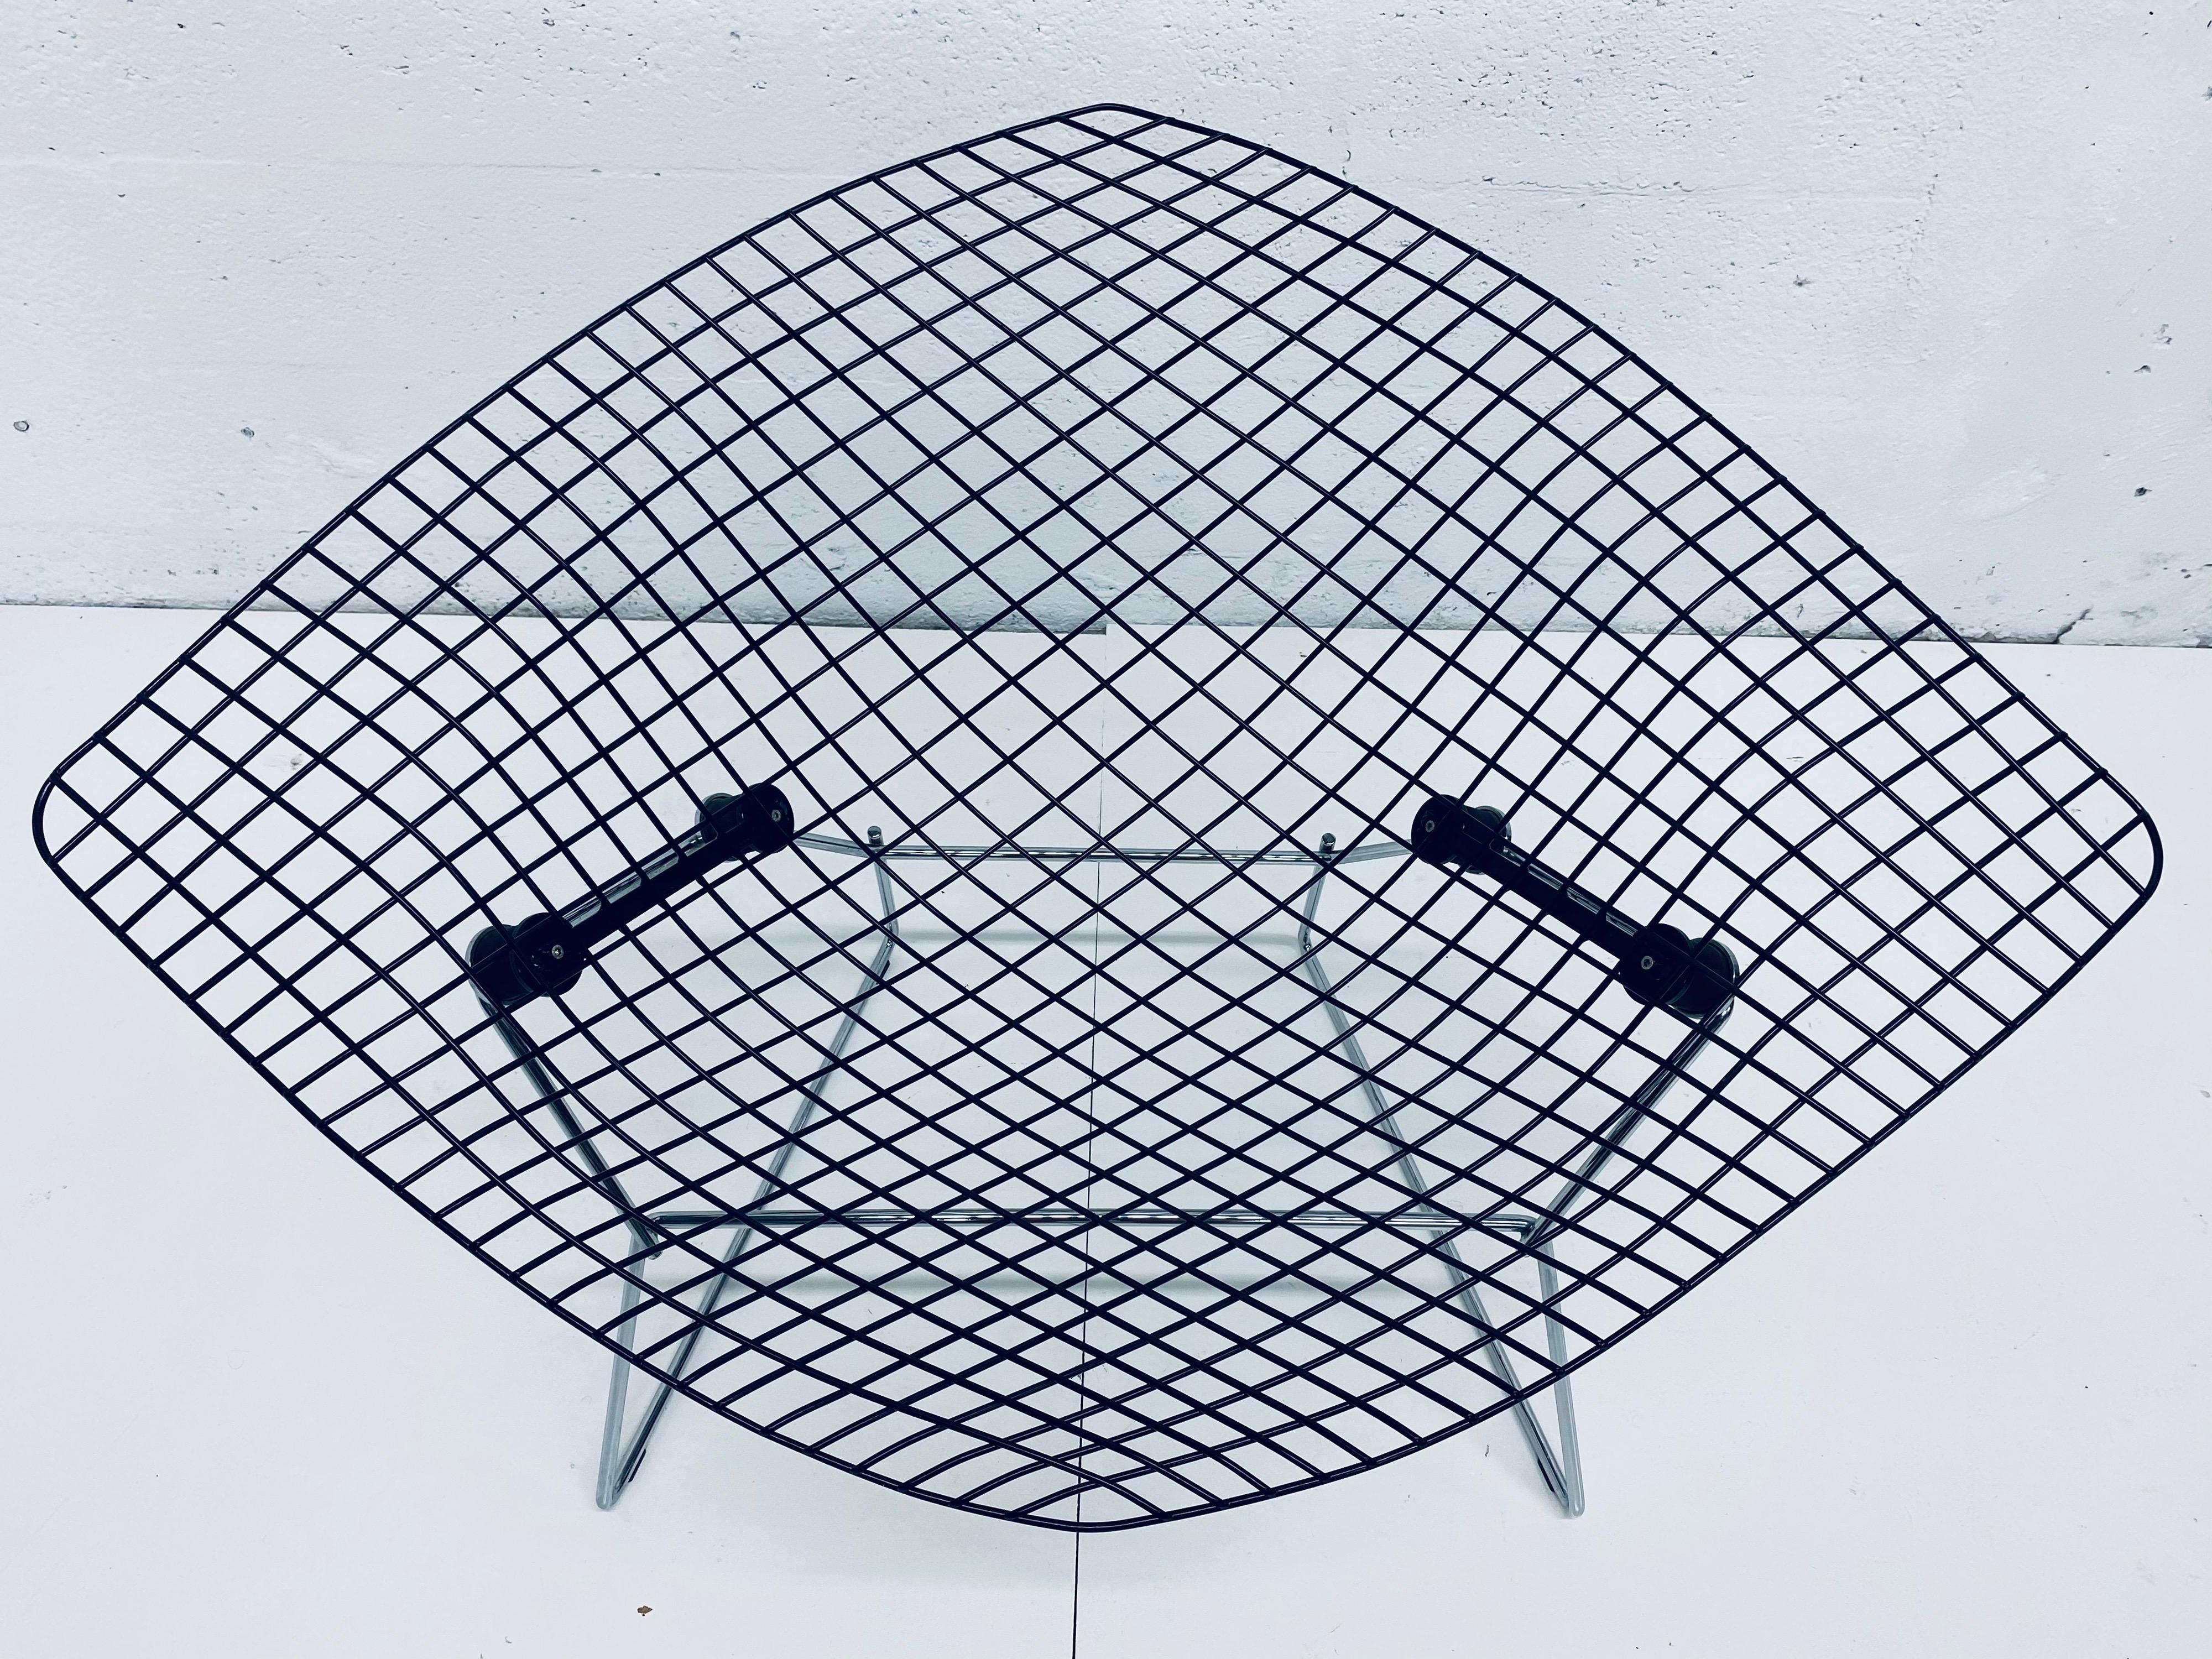 Mid-20th Century Harry Bertoia Wide Diamond Chair with Black Seat and Chrome Base for Knoll